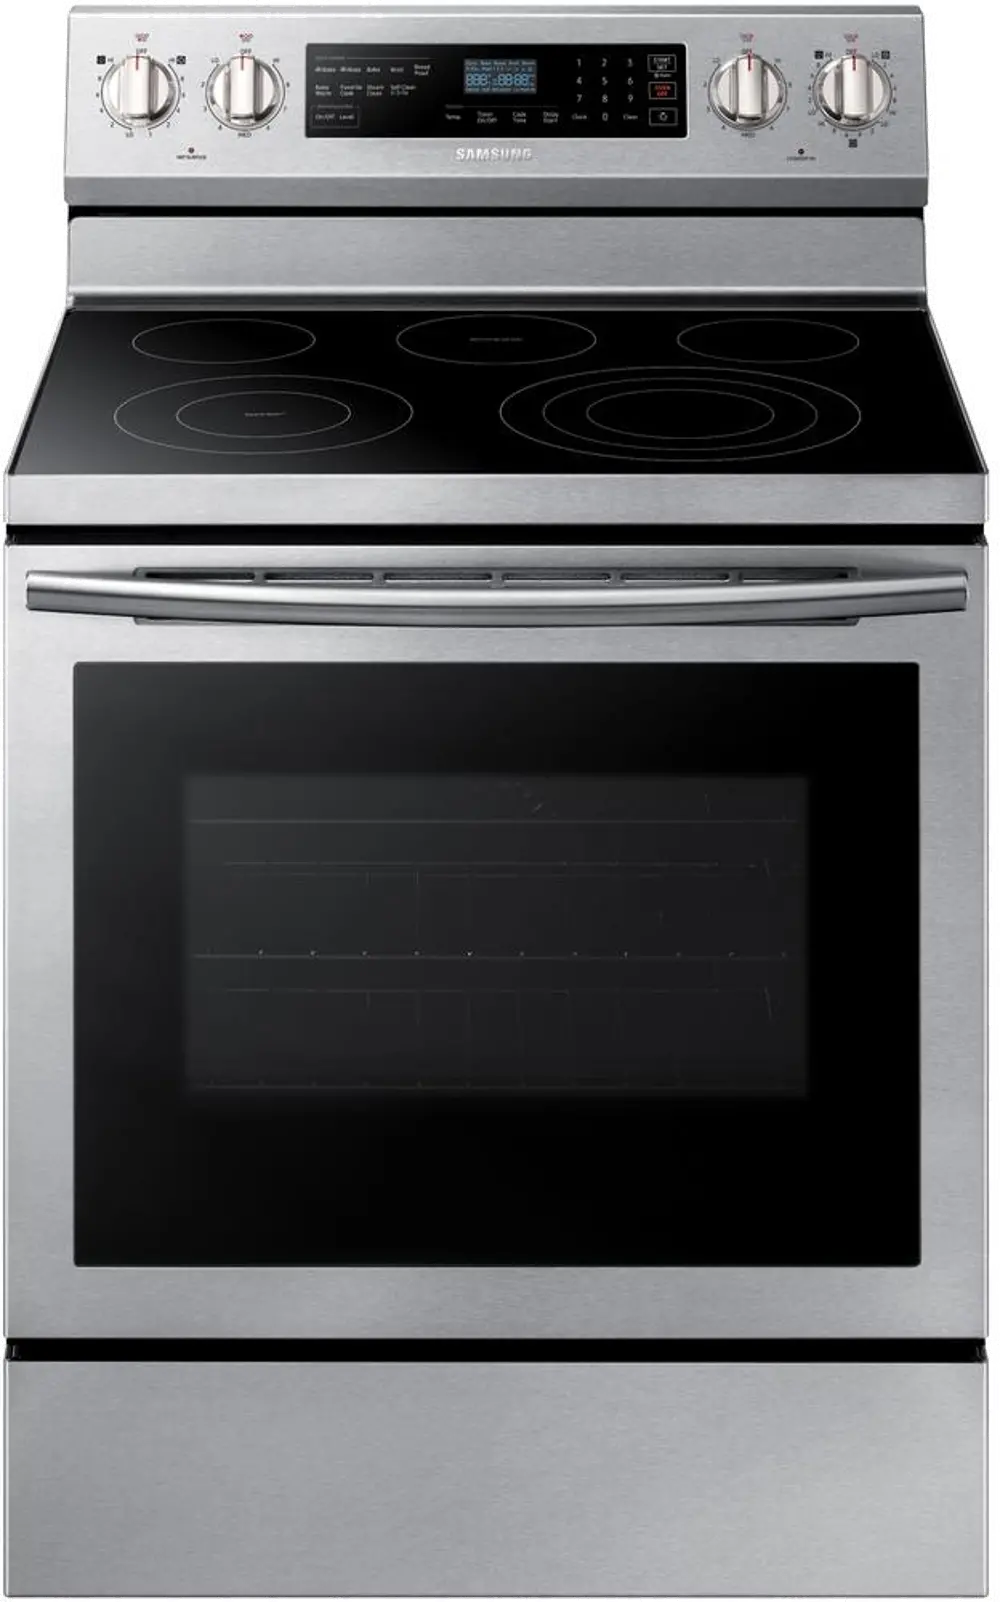 NE59N6630SS Samsung 5.9 cu. ft.  Electric Range with Steam Clean - Stainless Steel-1